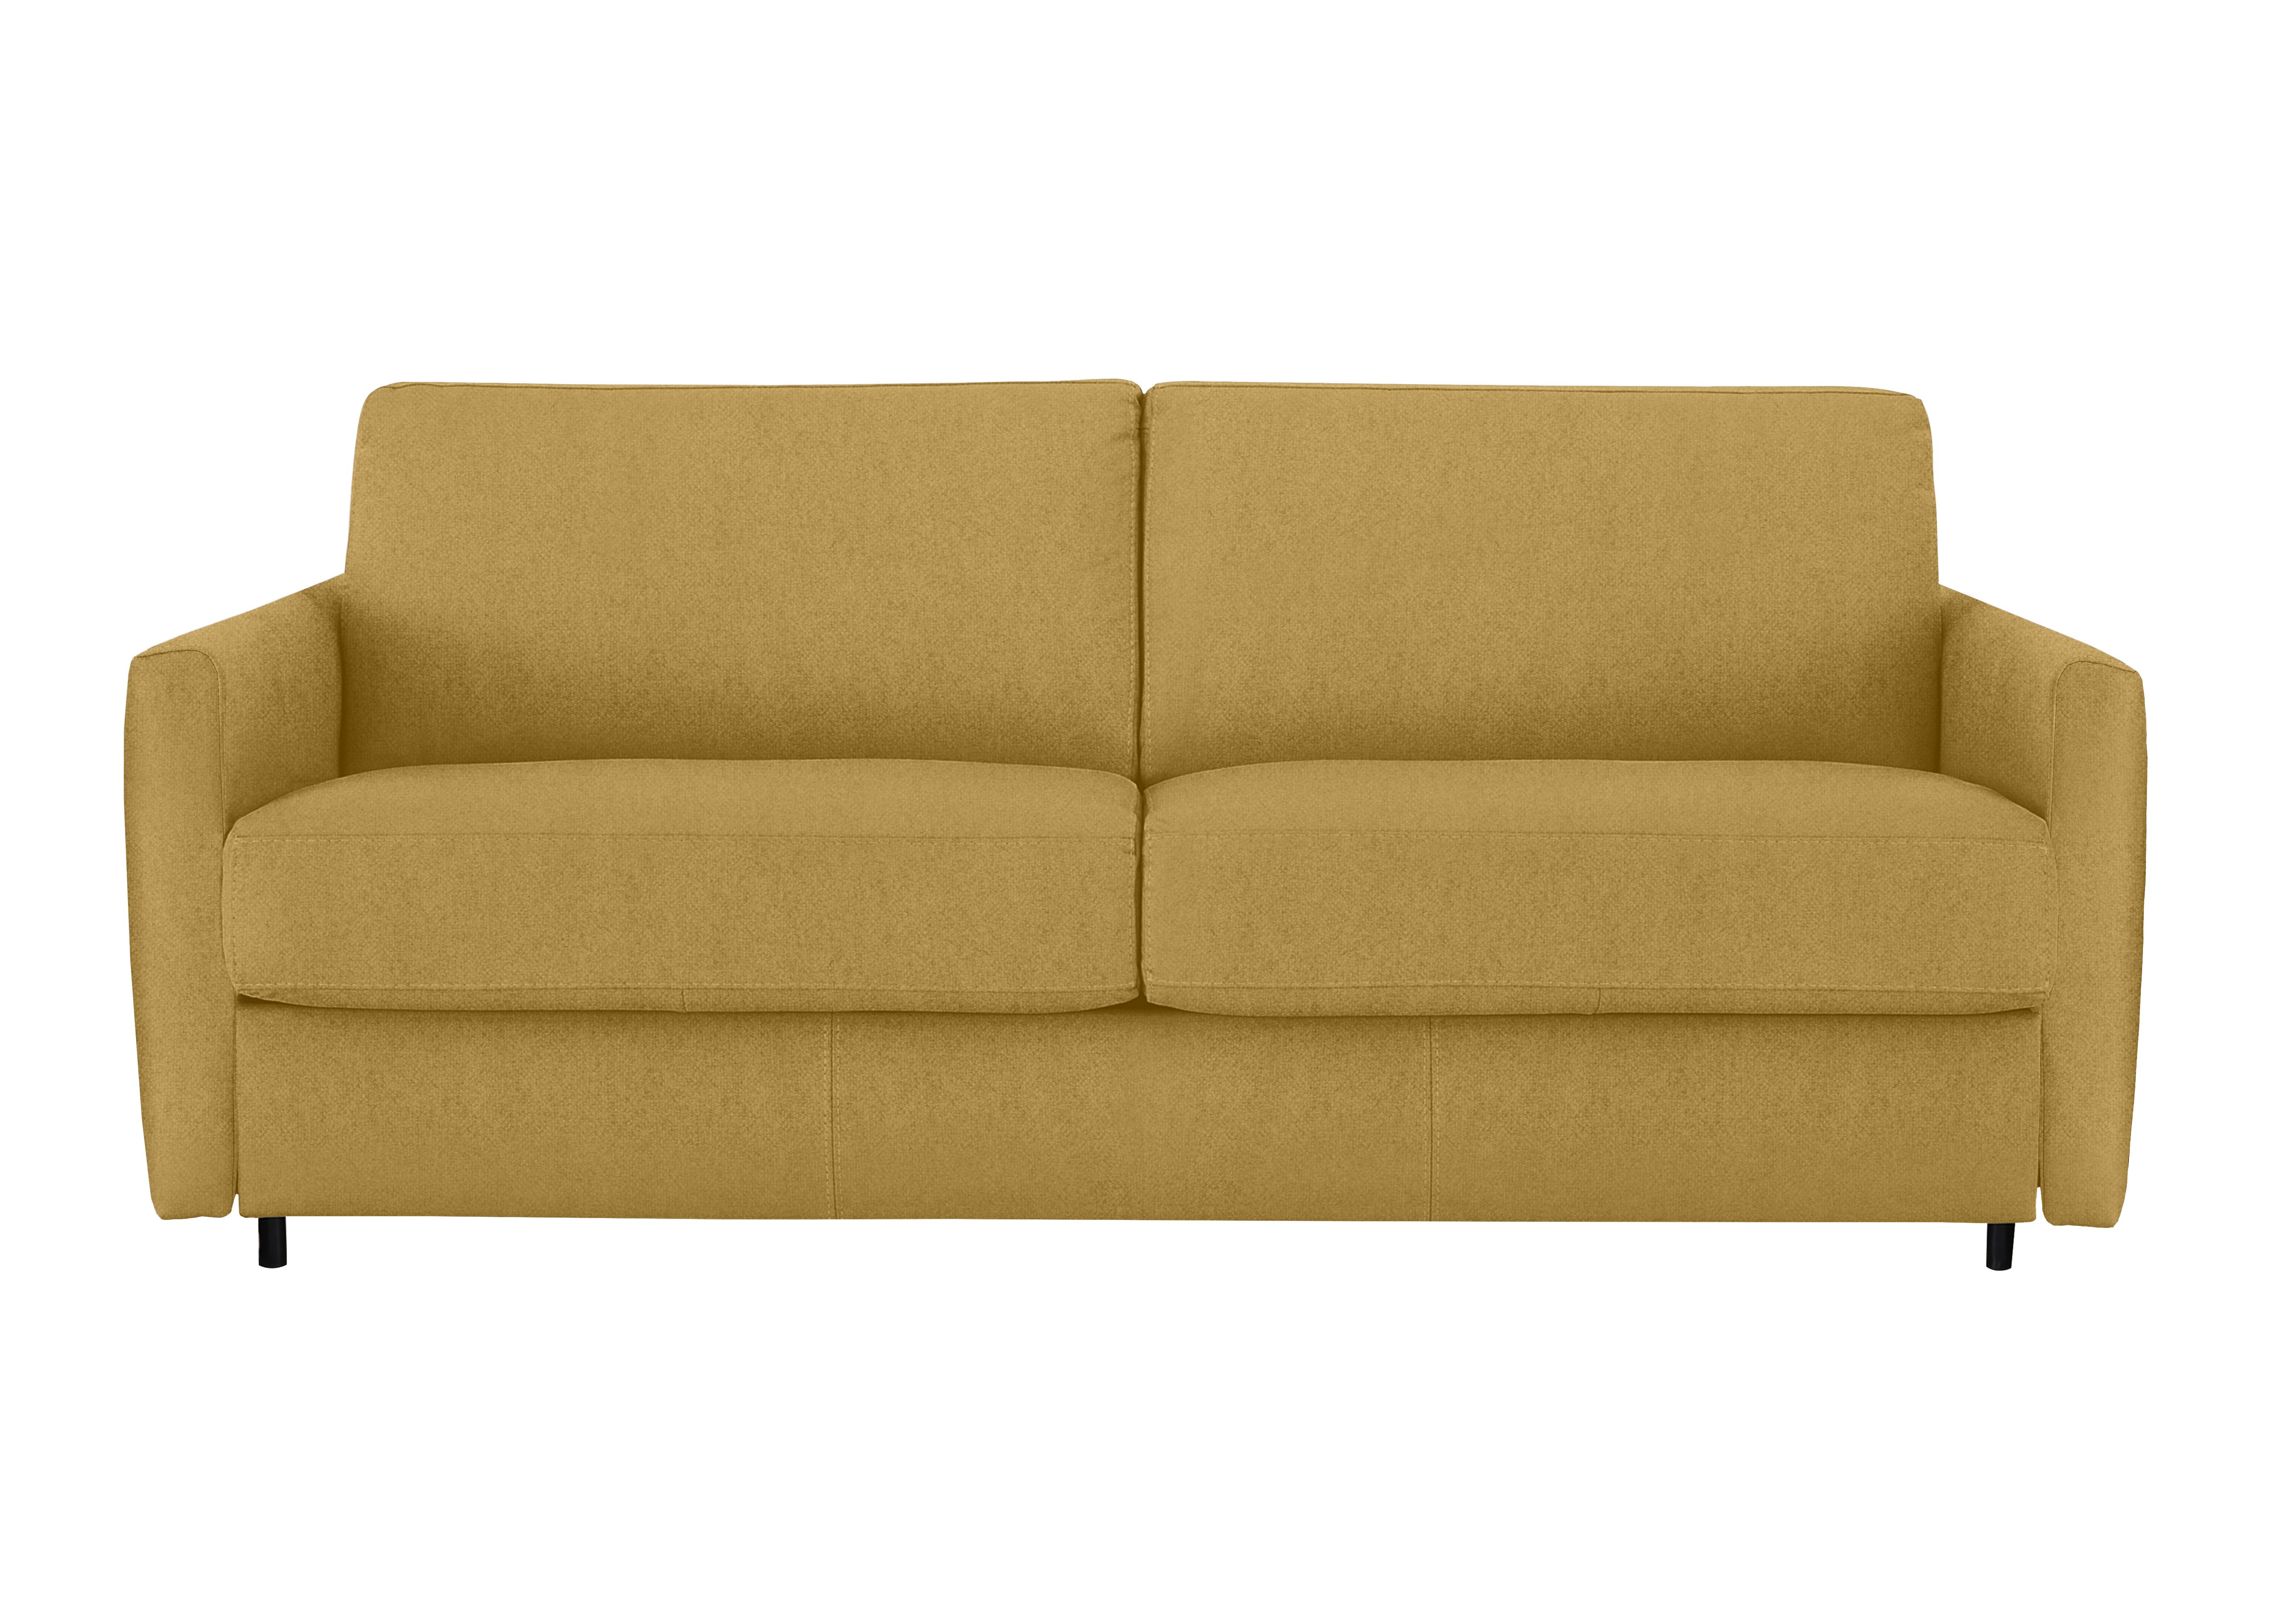 Alcova 3 Seater Fabric Sofa Bed with Slim Arms in Fuente Mostaza on Furniture Village